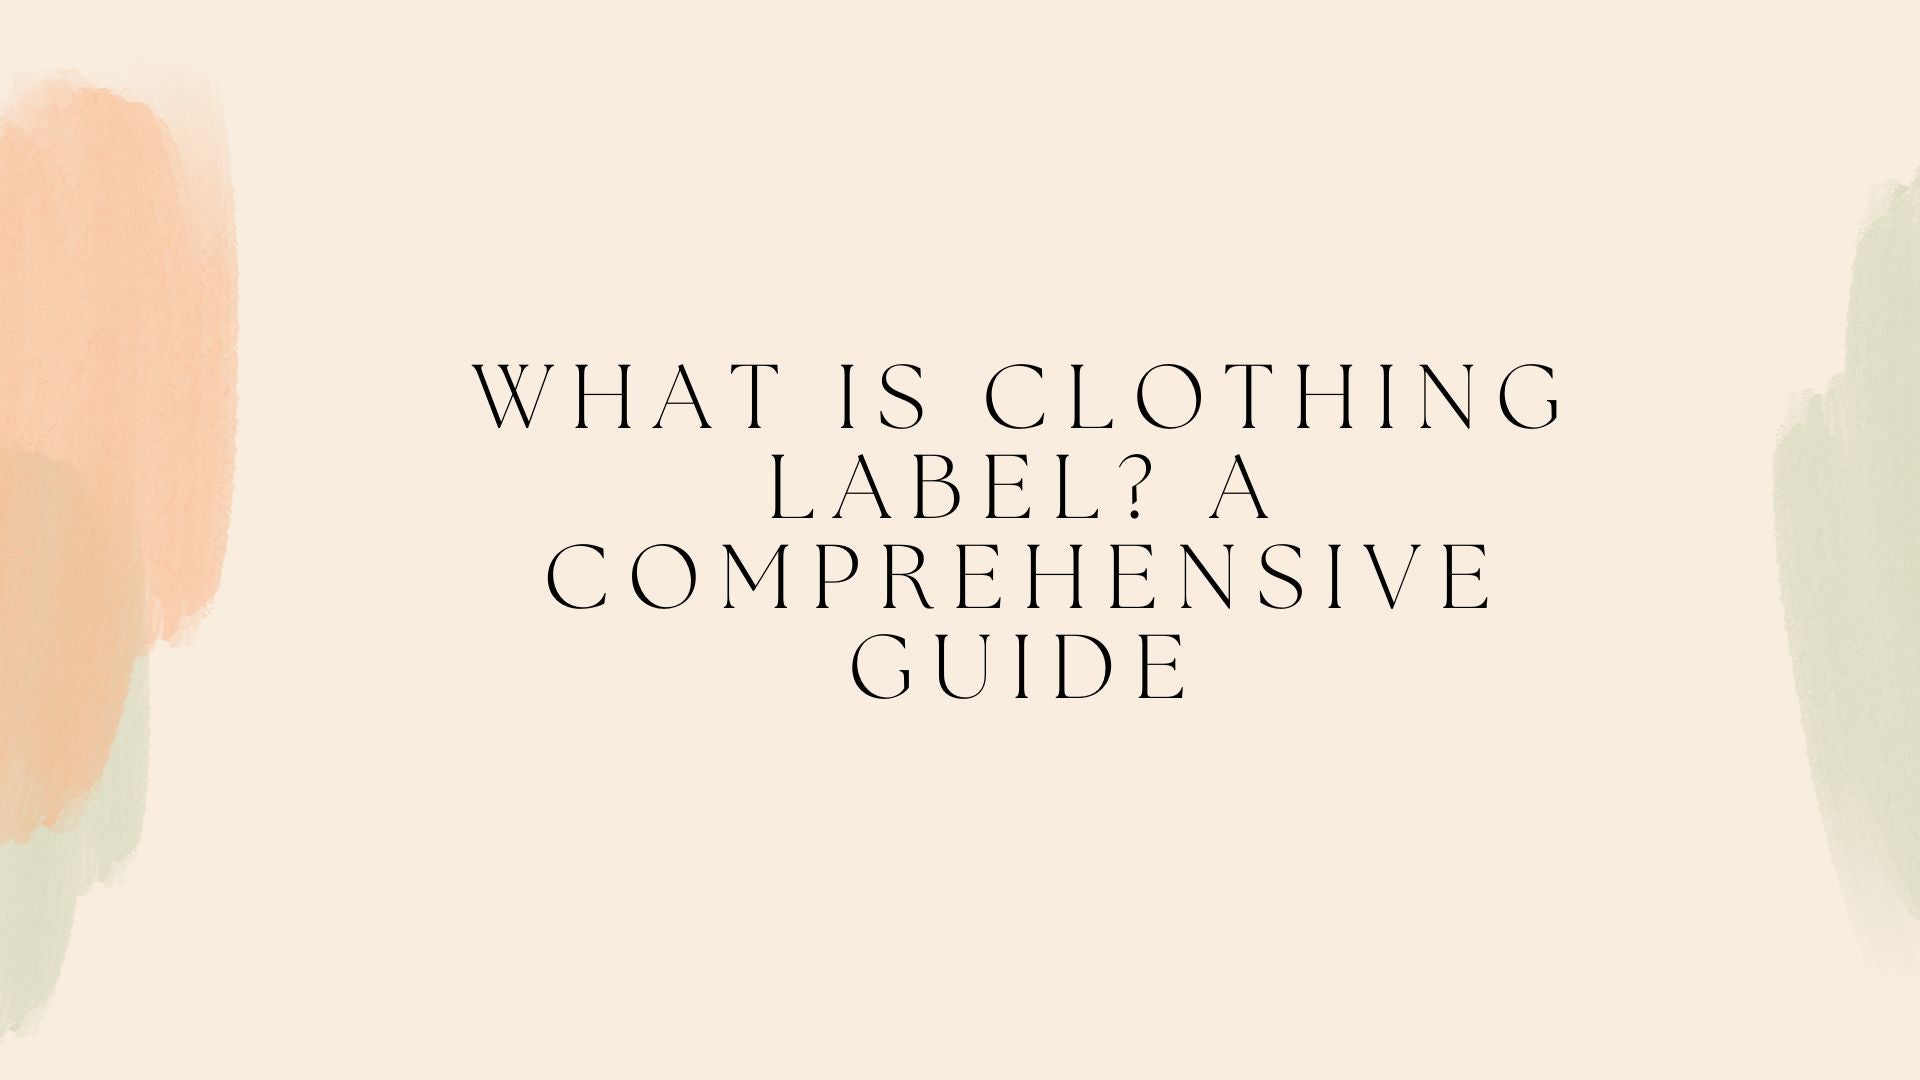 What Is Clothing Label? A Comprehensive Guide